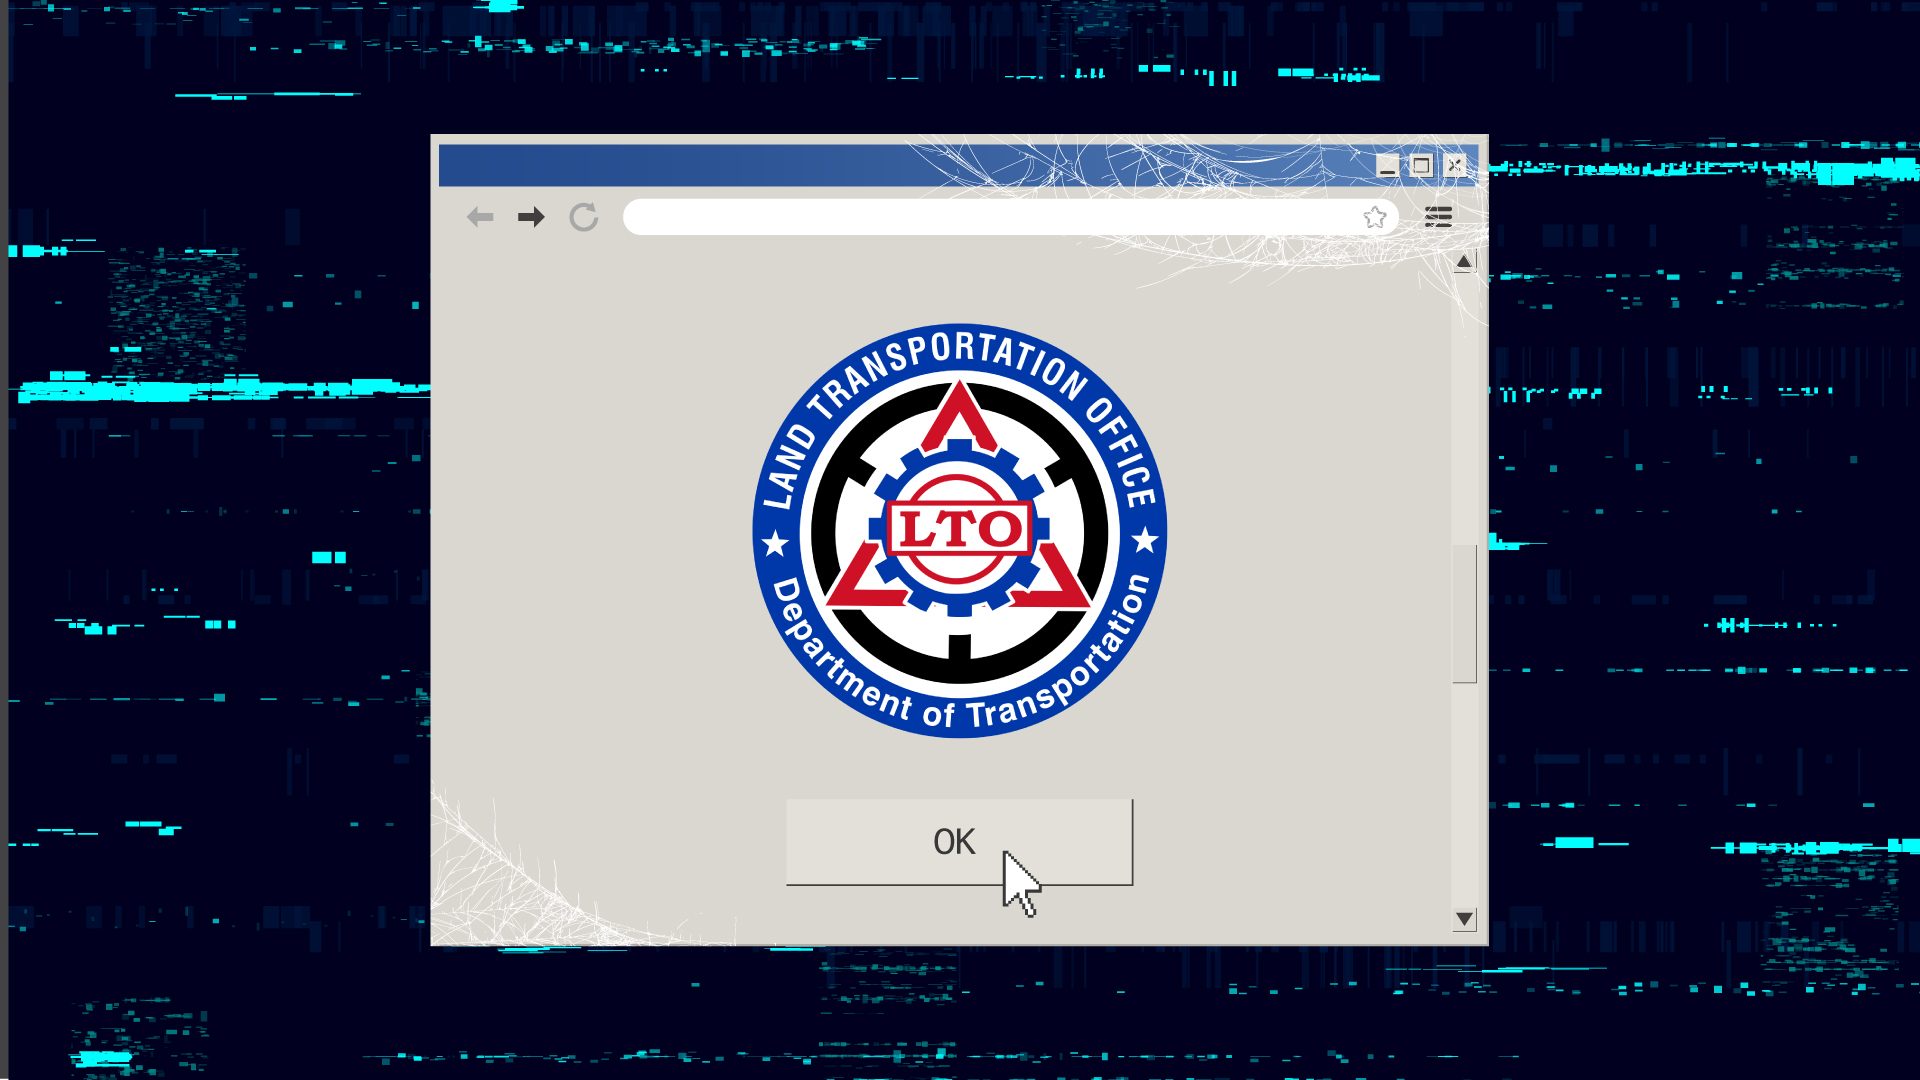 LTO’s old IT system enables fraud, and motorists pay more for it too